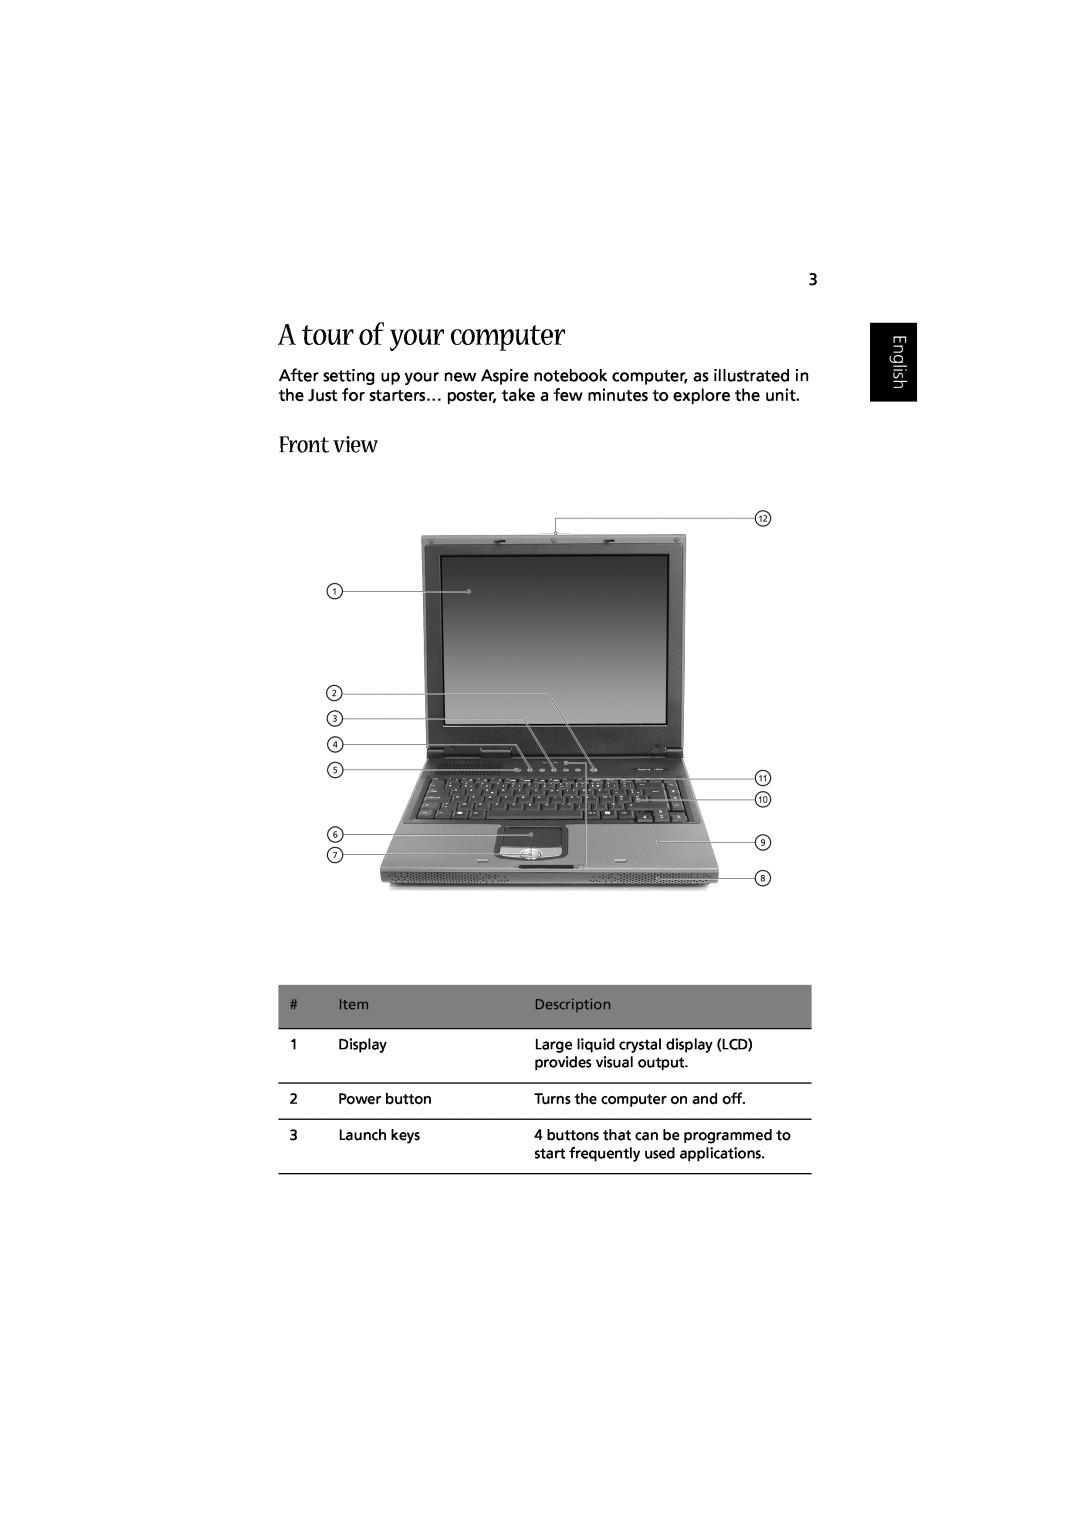 Acer Aspire 1350 manual A tour of your computer, Front view, English 